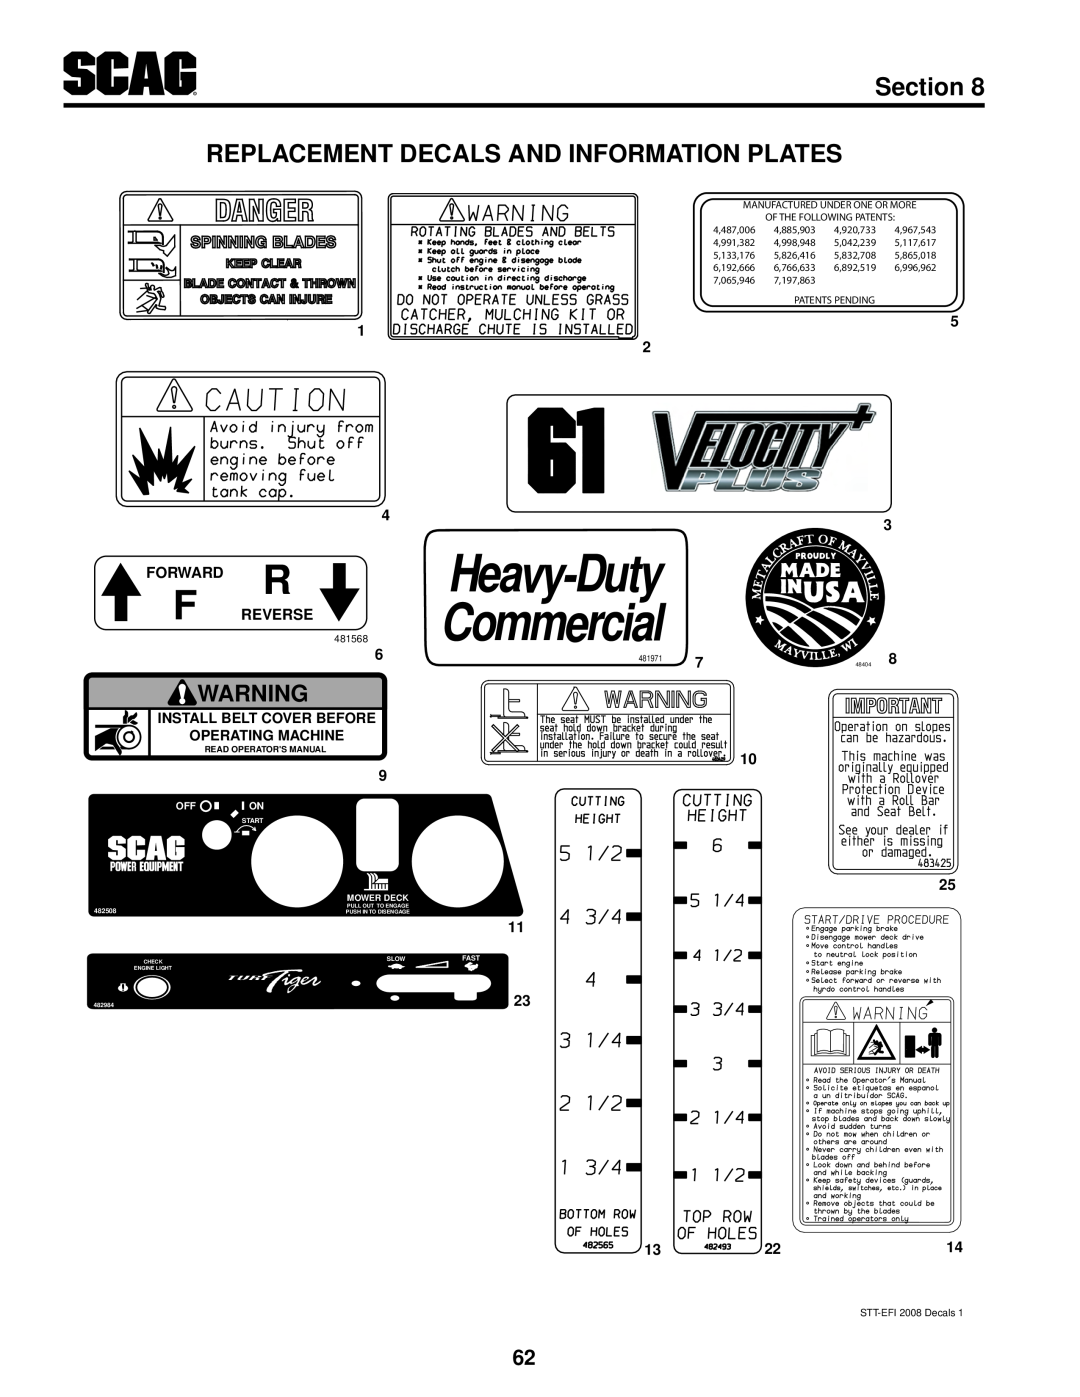 Scag Power Equipment STT61V-31EFI-SS manual Replacement Decals And Information Plates, Heavy-Duty Commercial, Section 